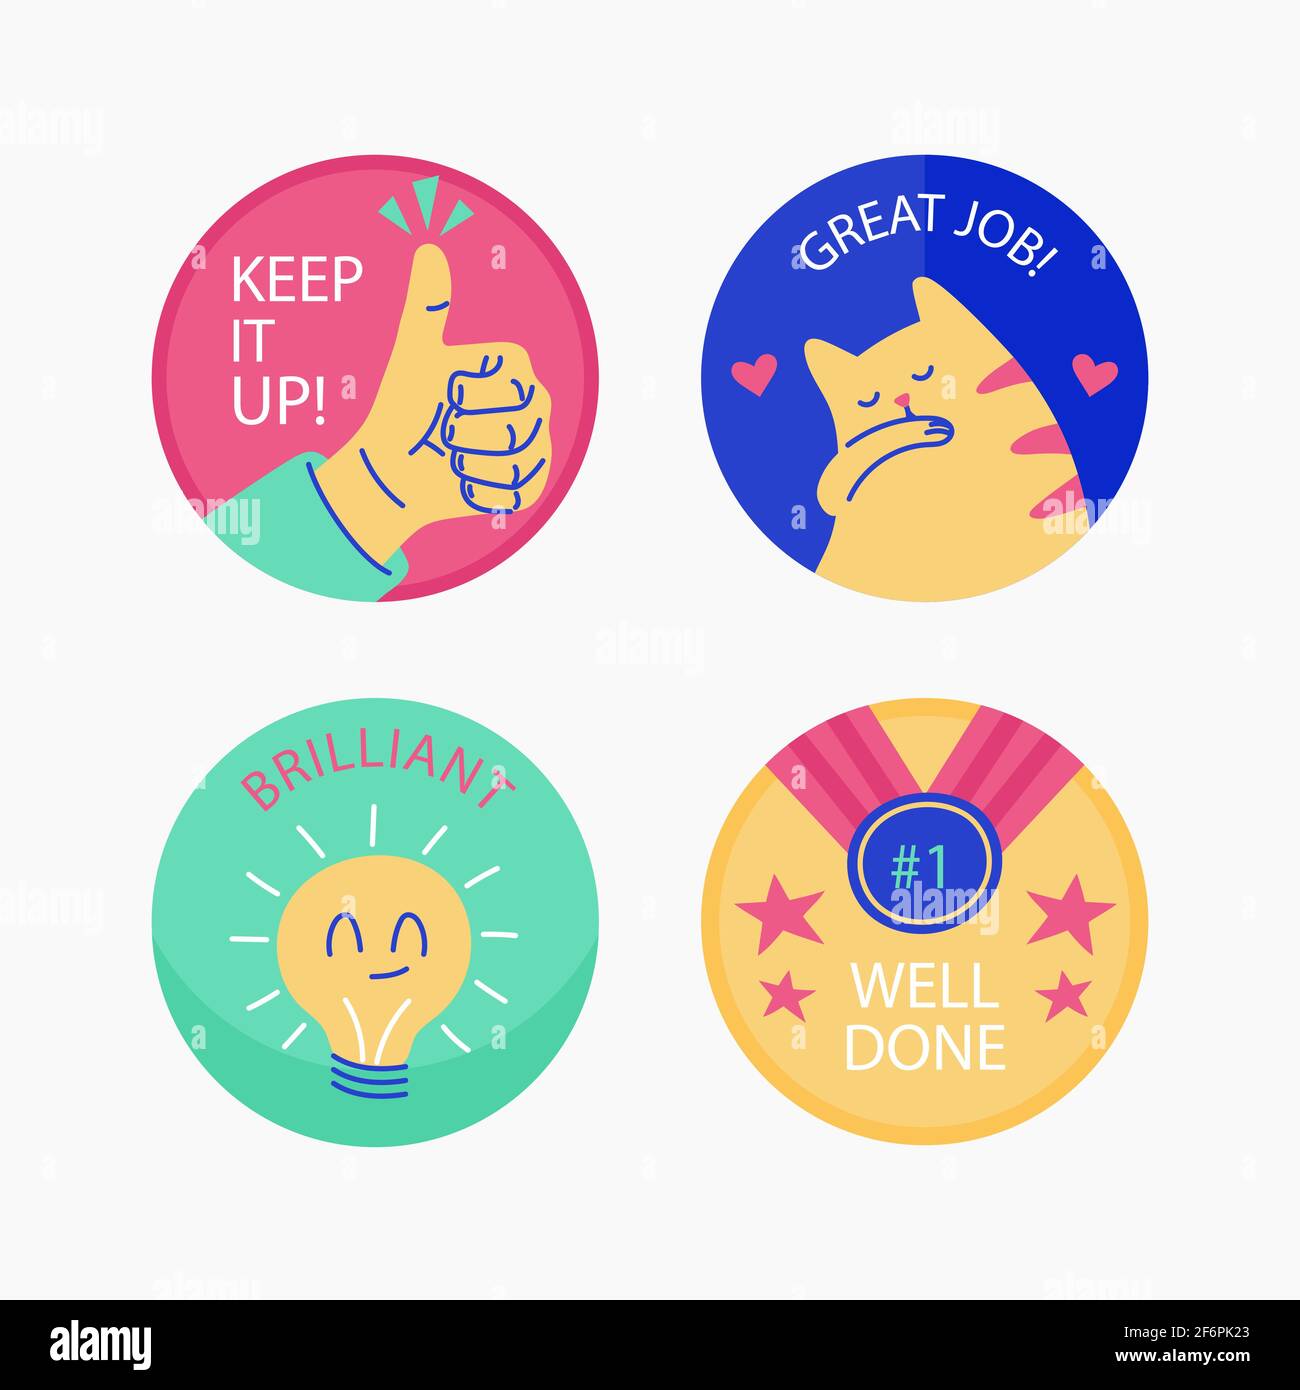 Set of great job and good job stickers Vector illustration. Stock Vector